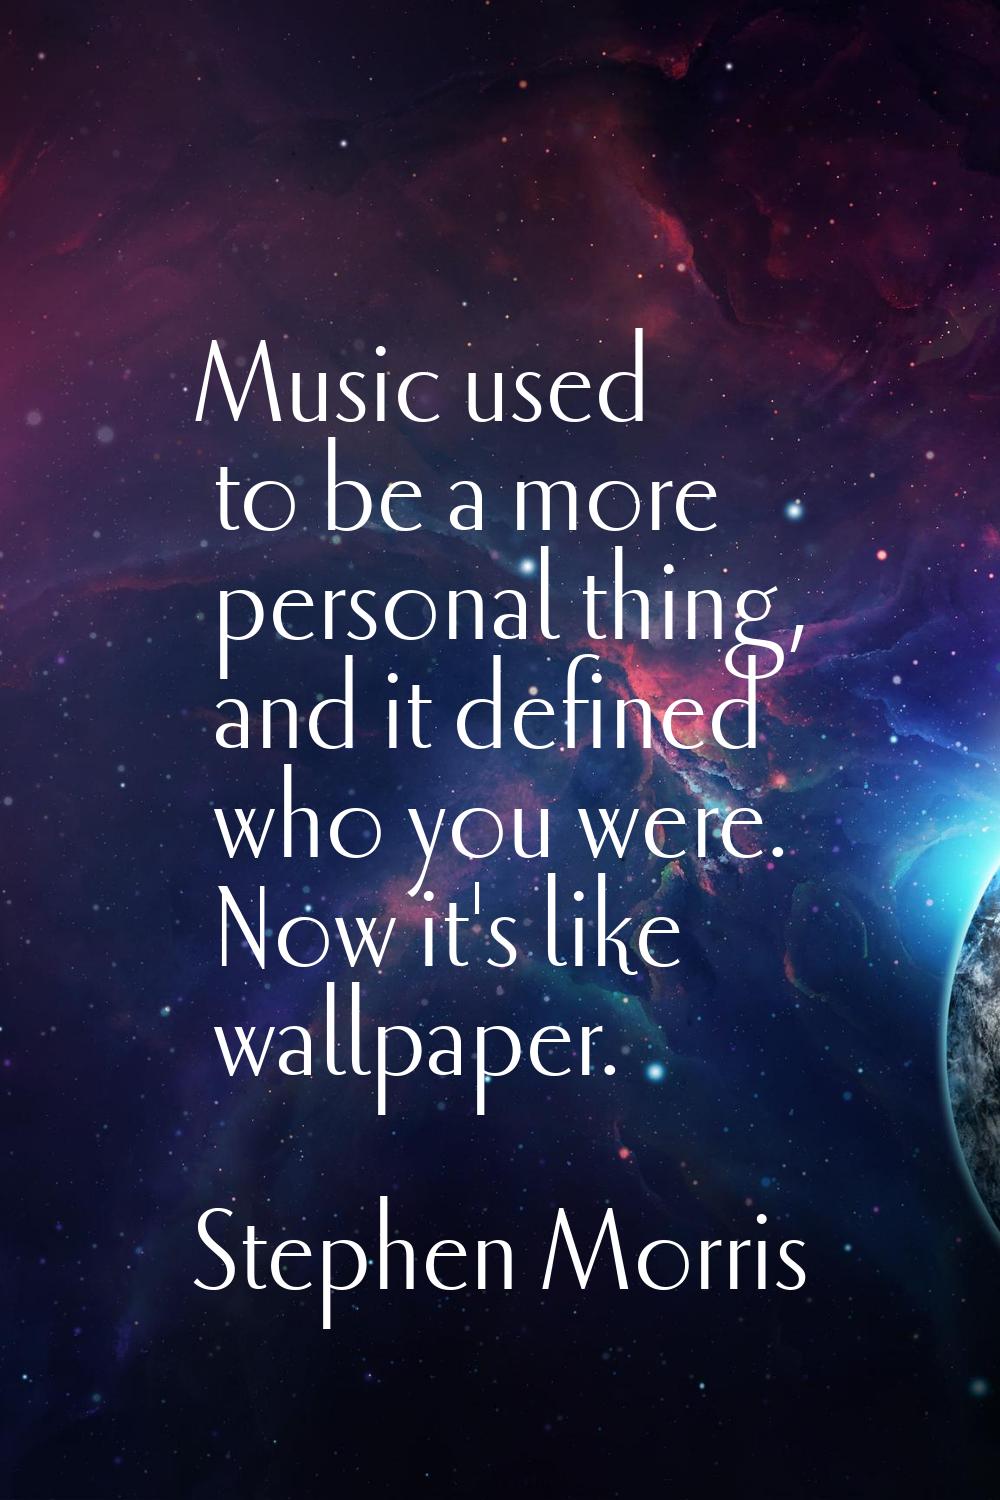 Music used to be a more personal thing, and it defined who you were. Now it's like wallpaper.